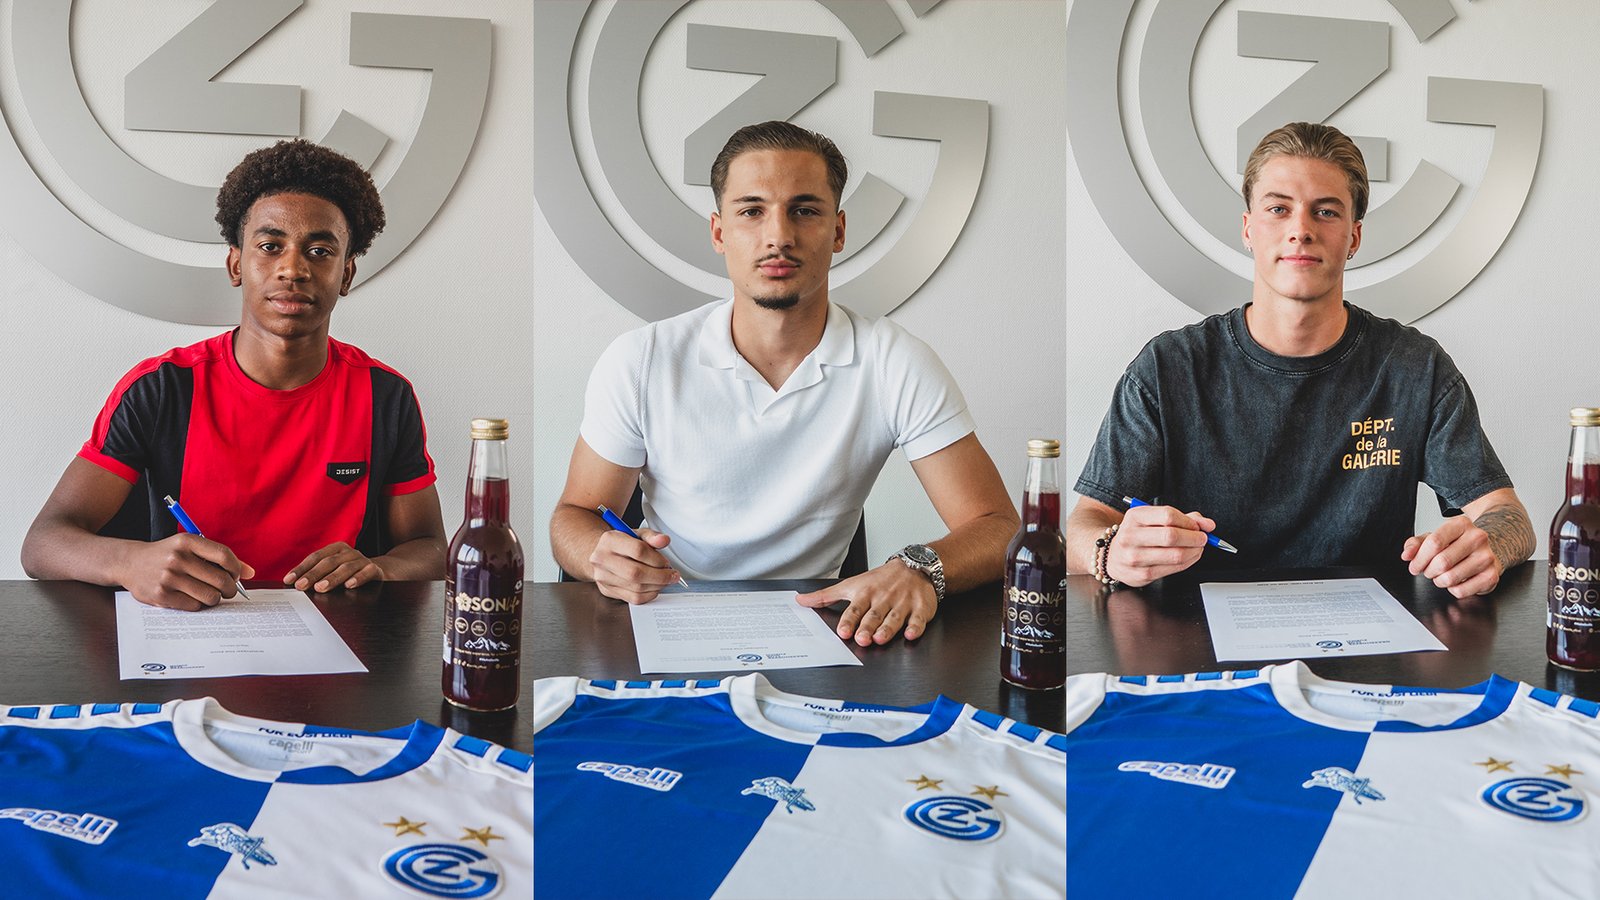 GC ZURICH SIGNS THREE YOUNG TALENTS TO LONG-TERM CONTRACTS